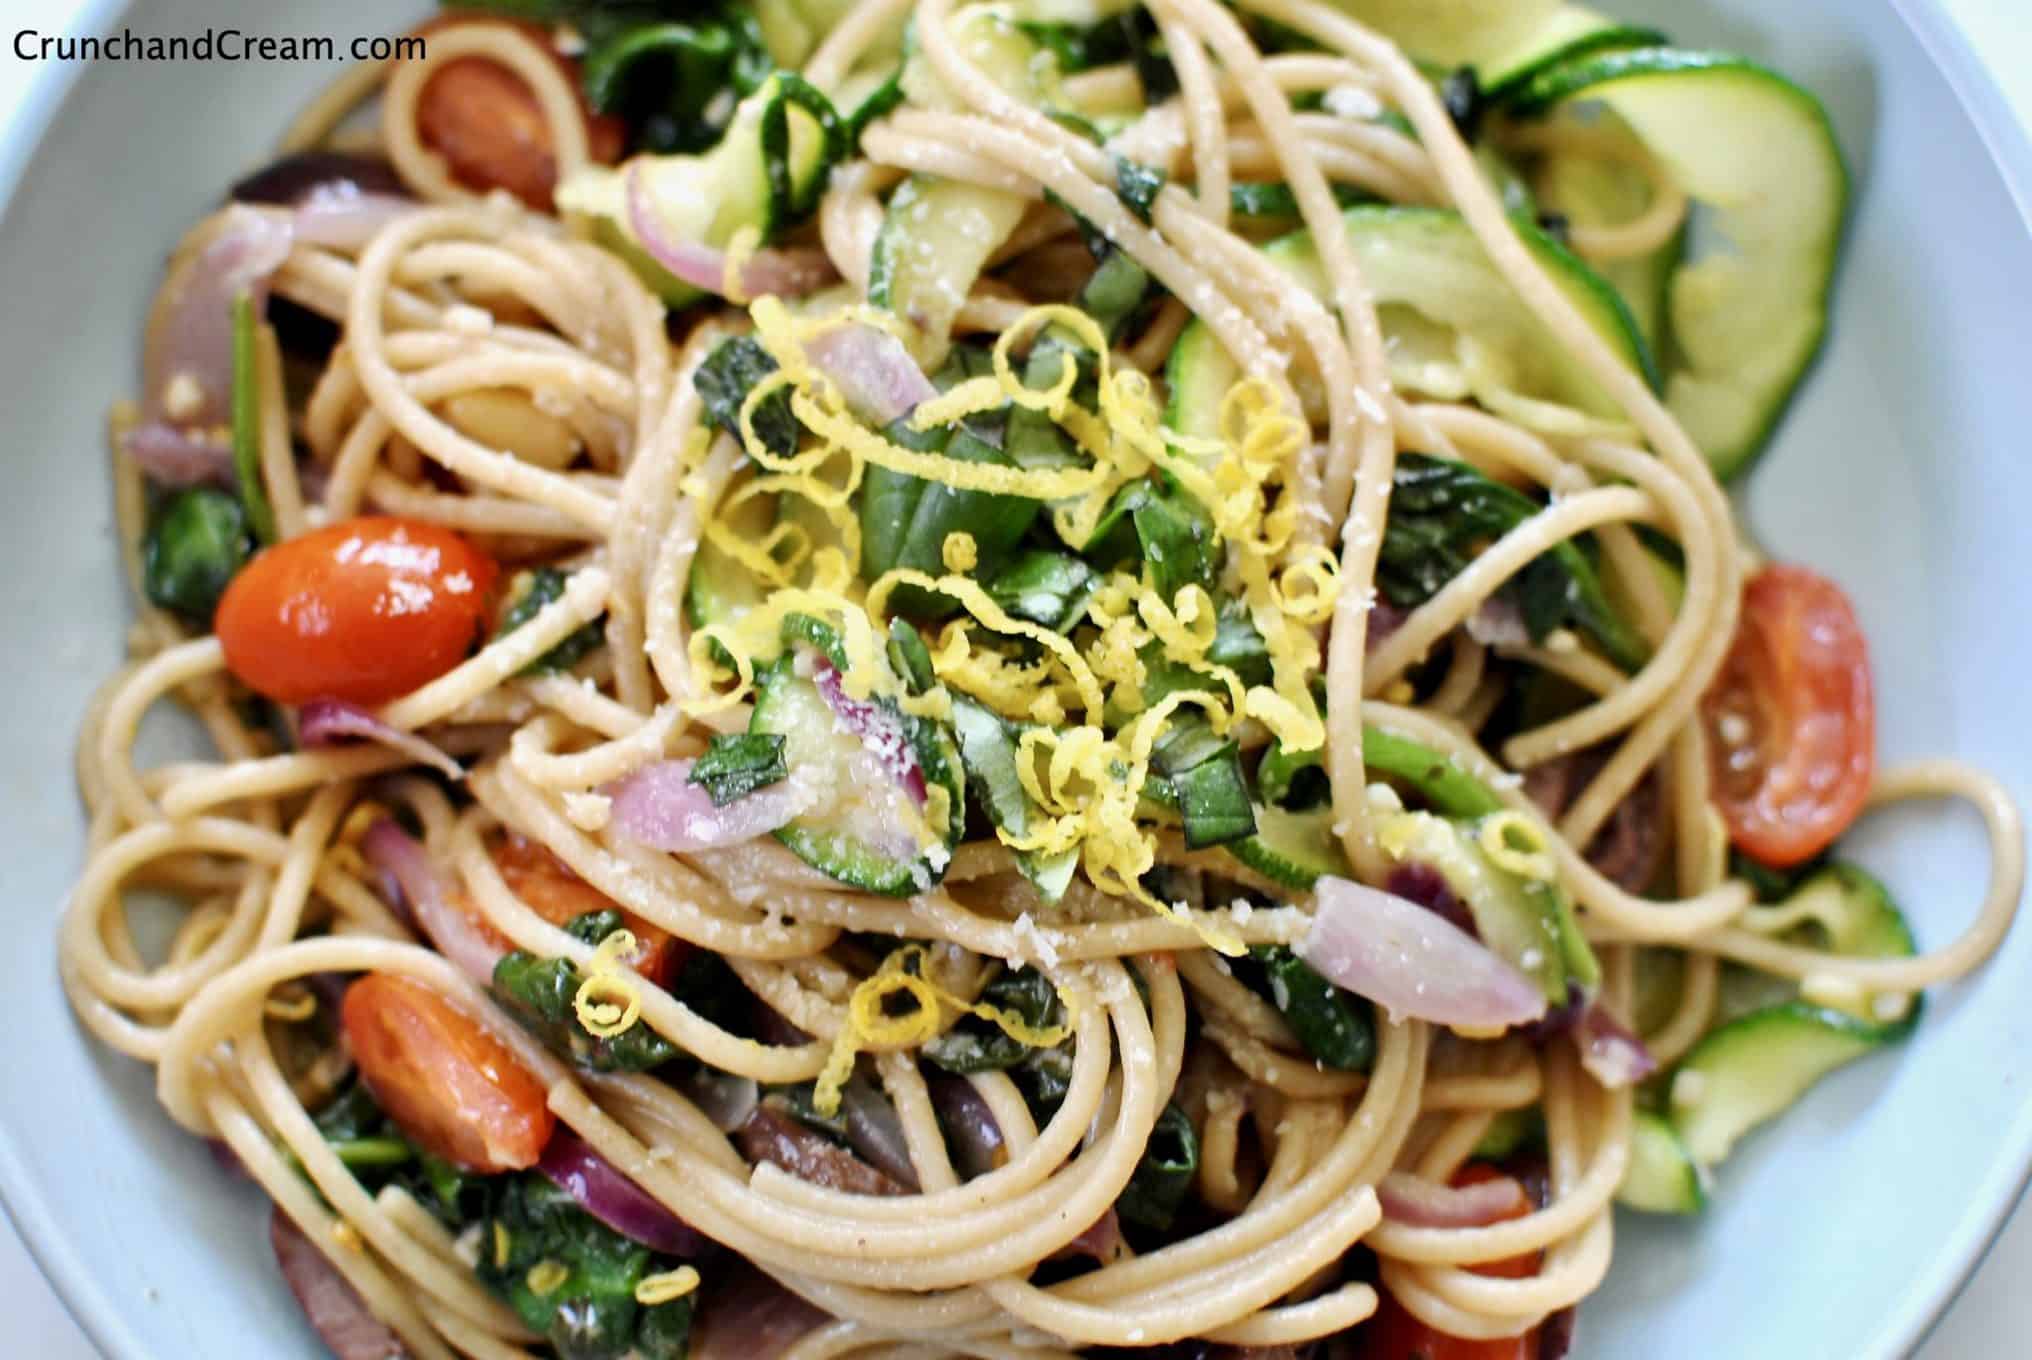 A delicious light Spring/Summer lunch with plenty of veggies, olive oil and parmesan. It's quick, easy and delicious.